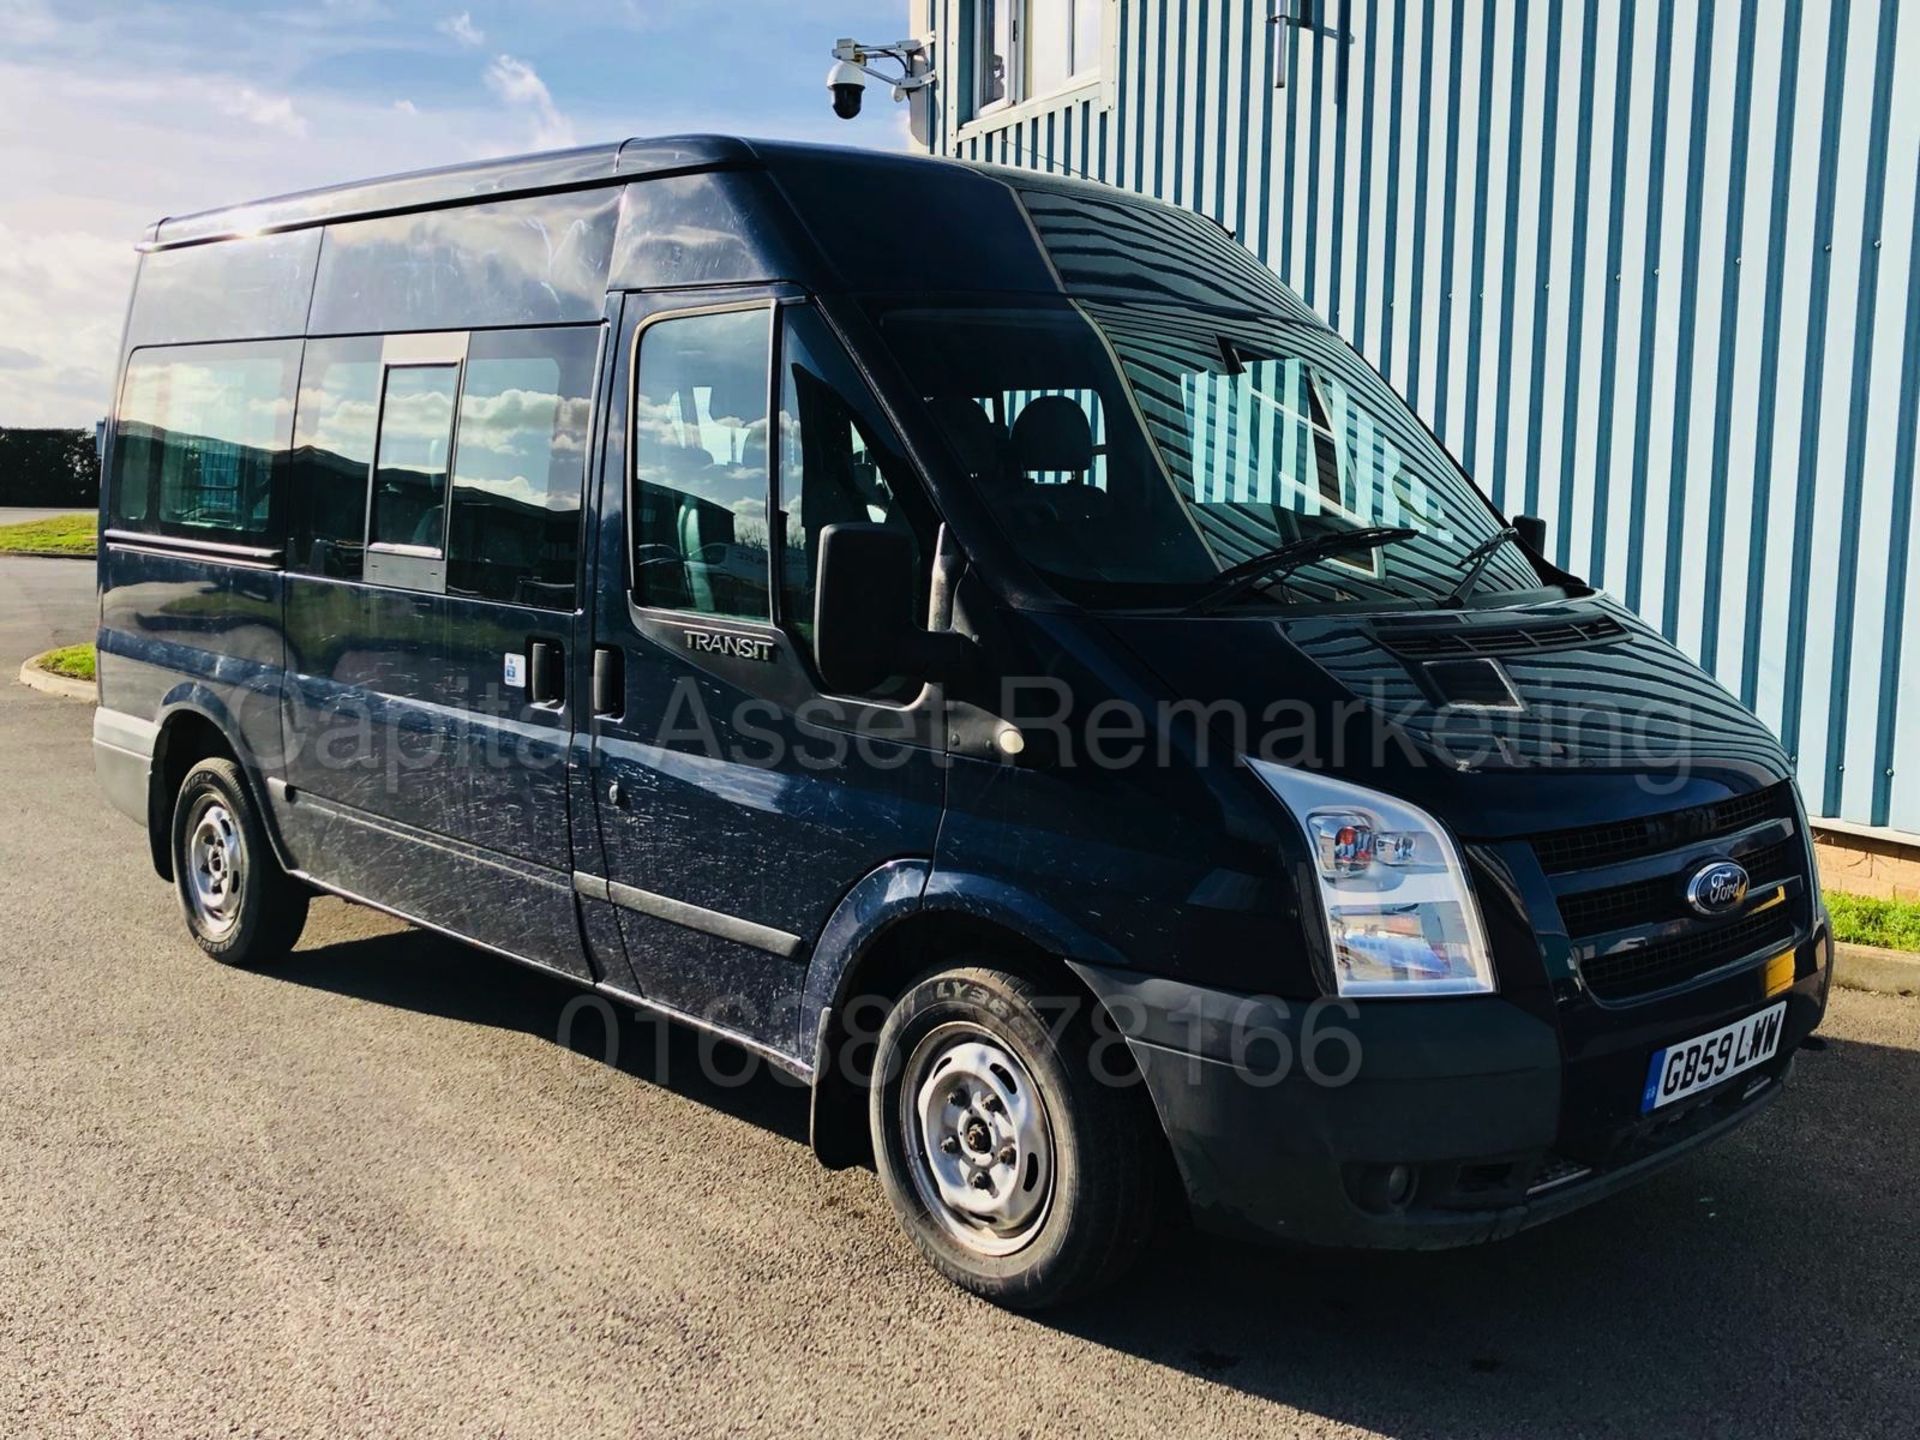 FORD TRANSIT 'TREND EDITION' 115 T300 'MW - 9 SEATER BUS' (2010) '2.2 TDCI - 115 PS - 6 SPEED'